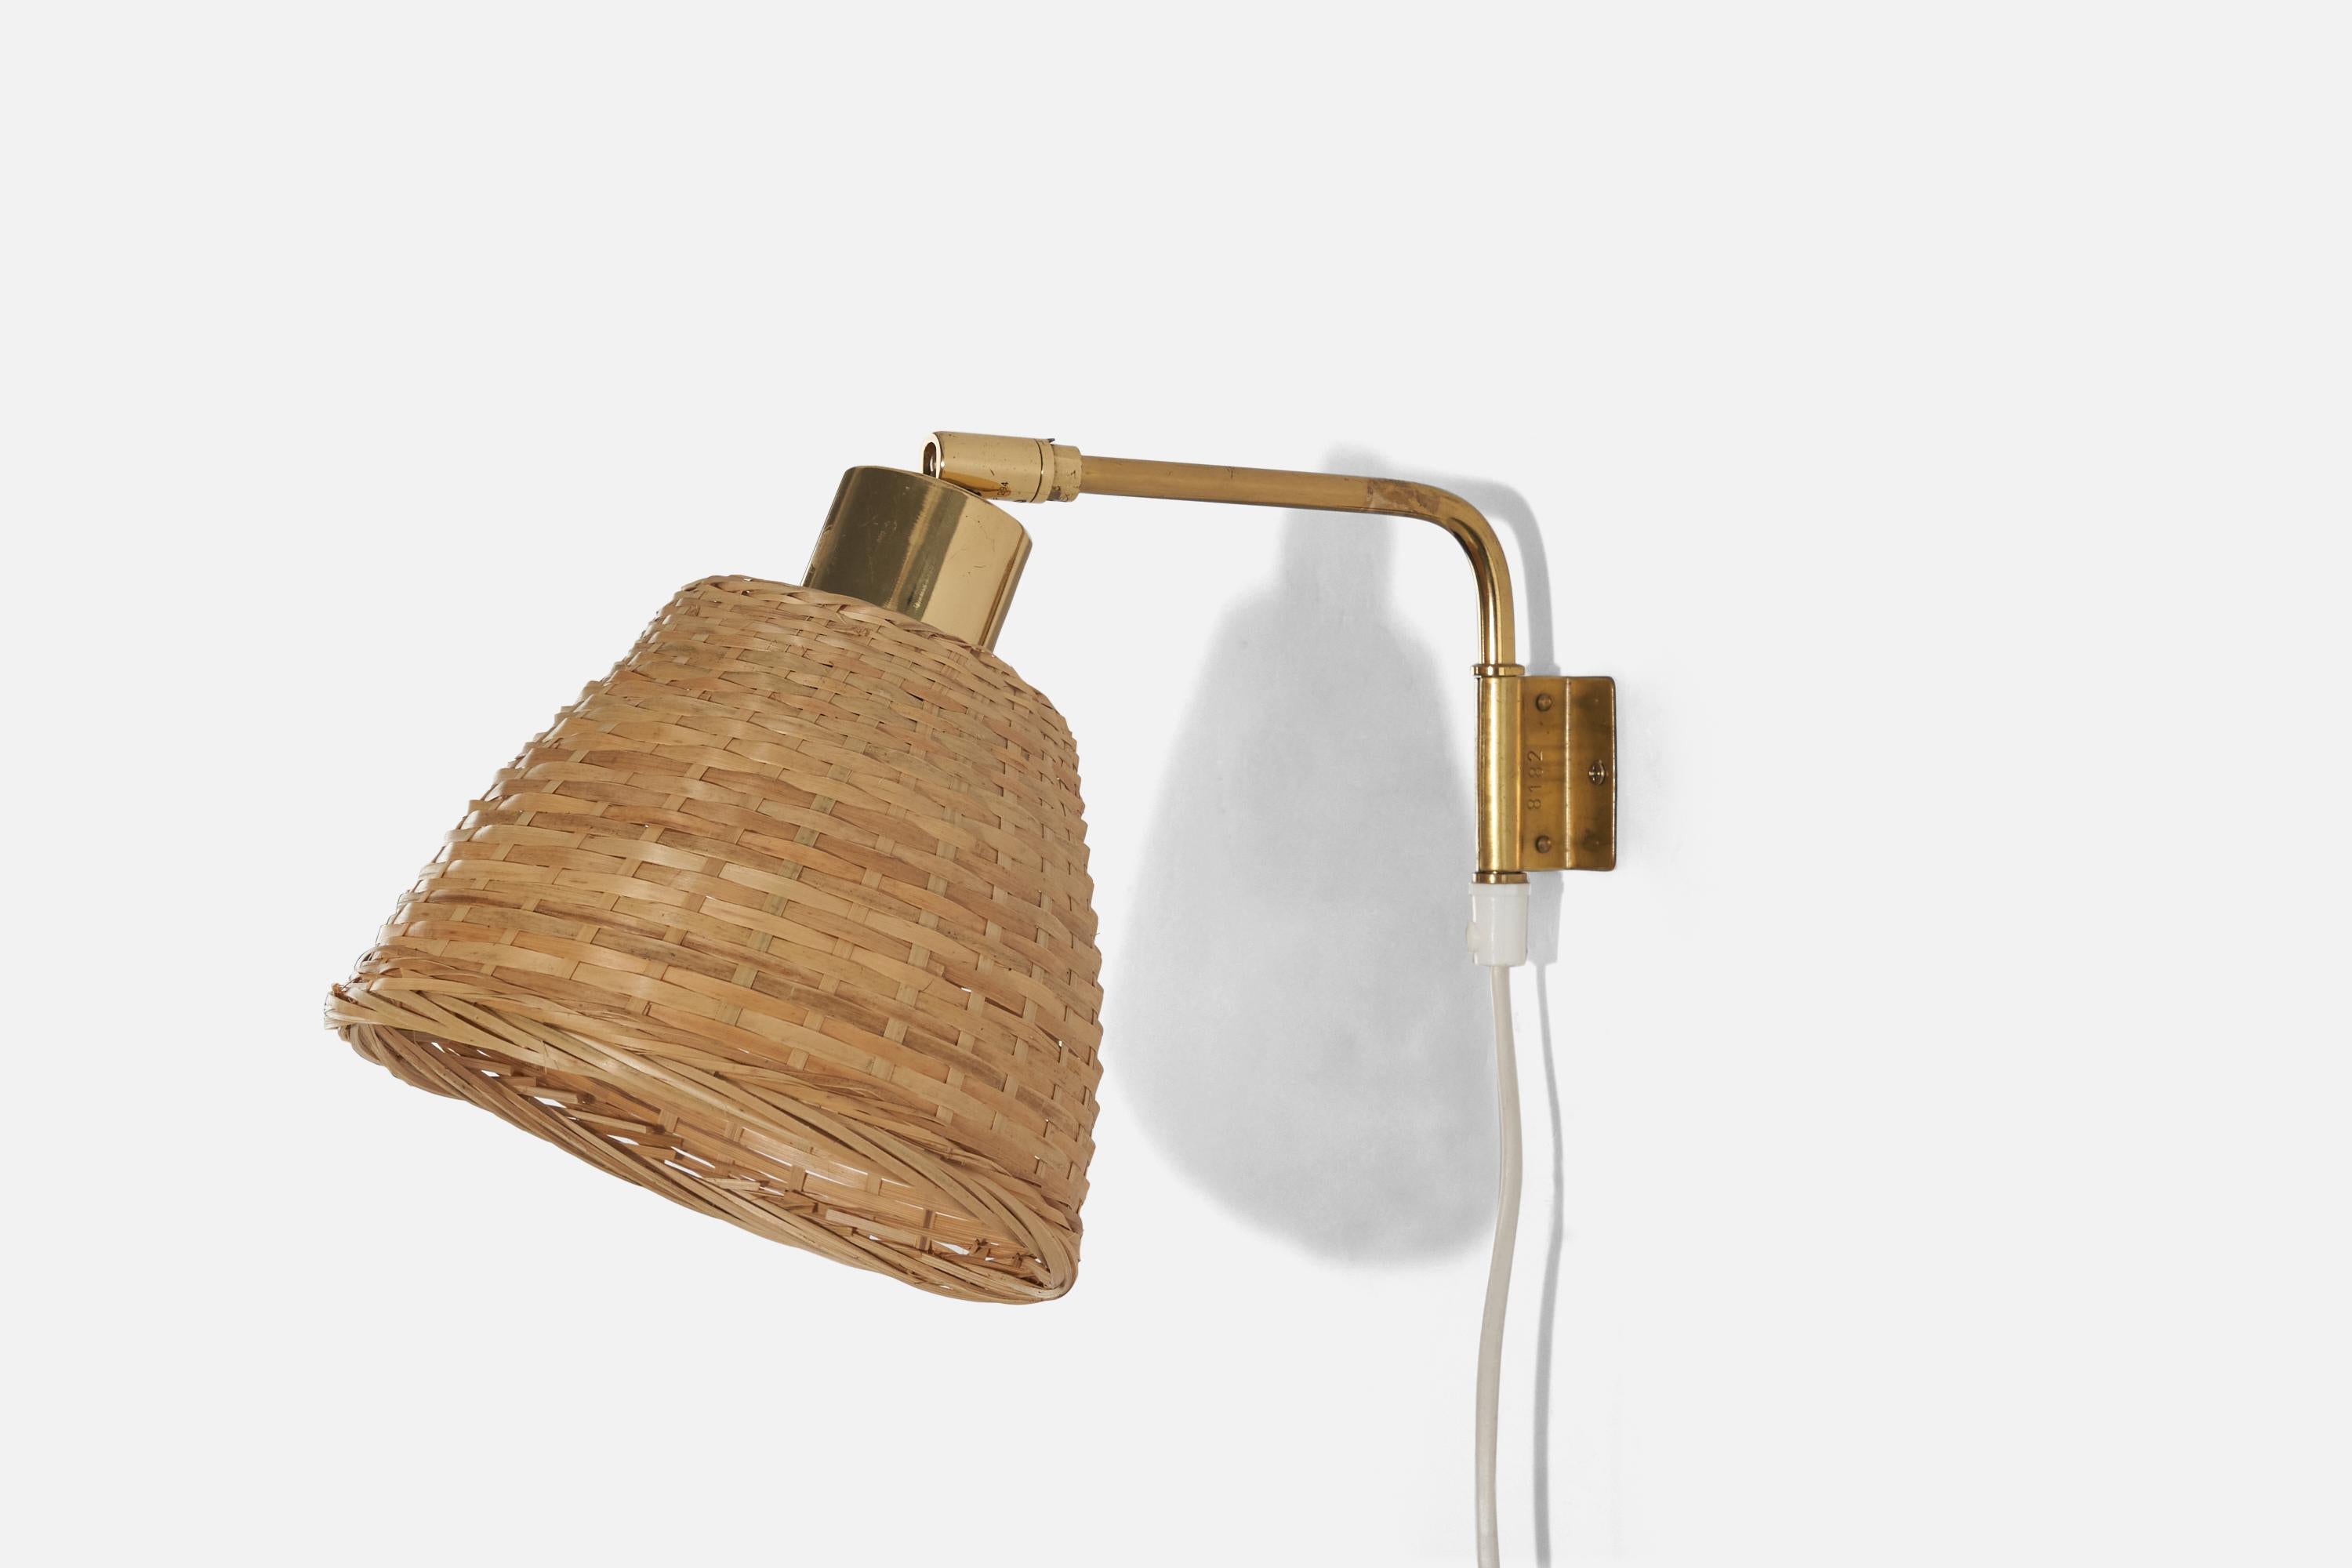 A brass and rattan, adjustable sconce designed and produced in Sweden, c. 1960s. 

Variable dimensions, measured as illustrated in the first image.
Dimensions of back plate (inches) : 1.97 x 1.62 x 0.05 (height x width x depth).

Socket takes